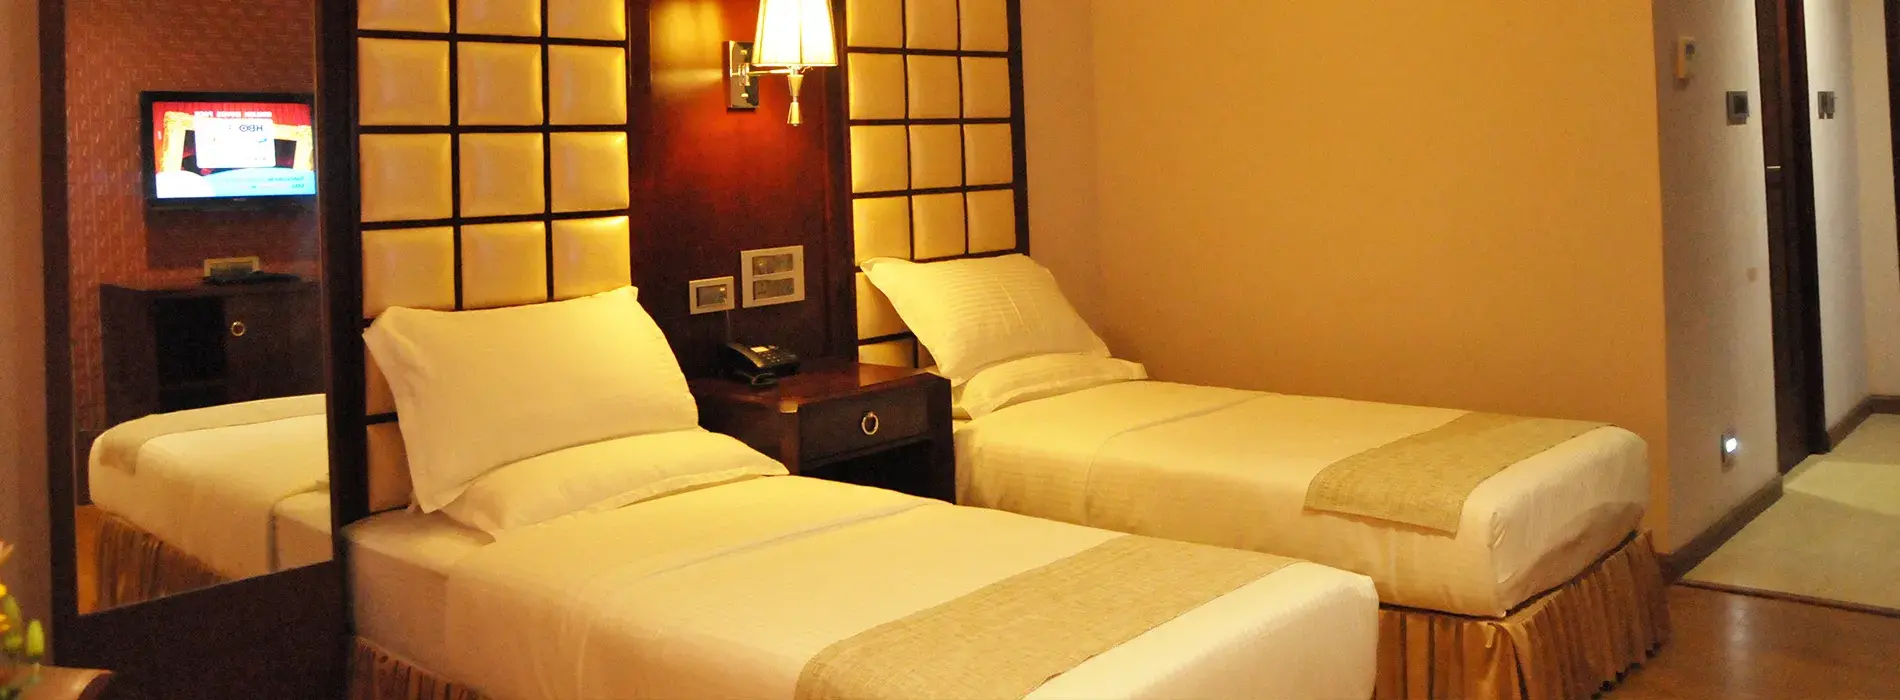 in Tirunelveli offers luxurious 3-star hotels and amenities